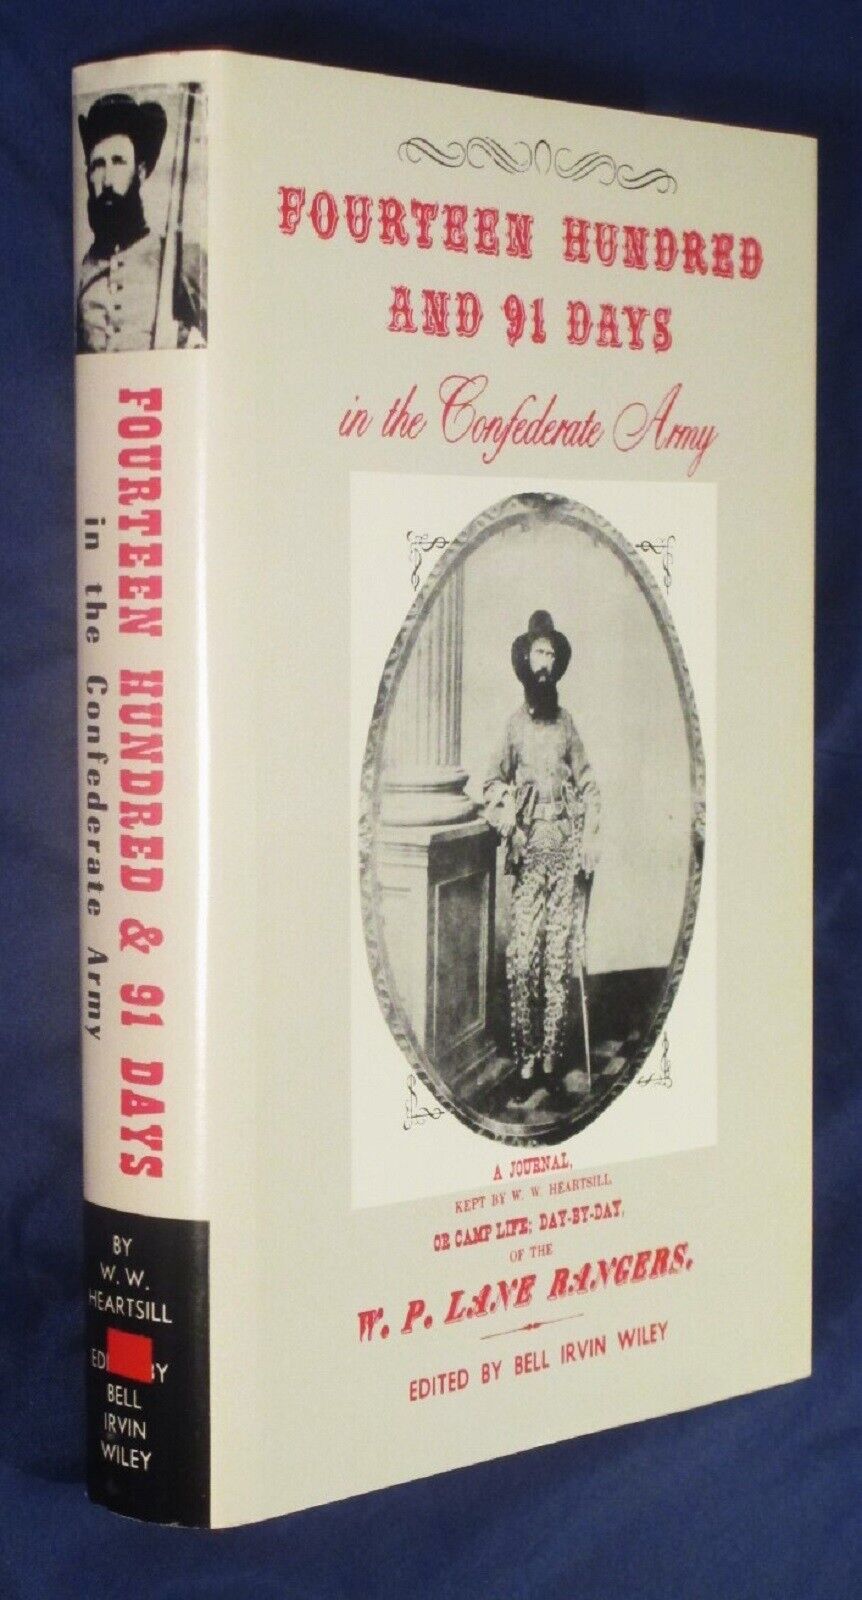 Confederate Civil War Journal Fourteen Hundred 91 Days in Confederate Army